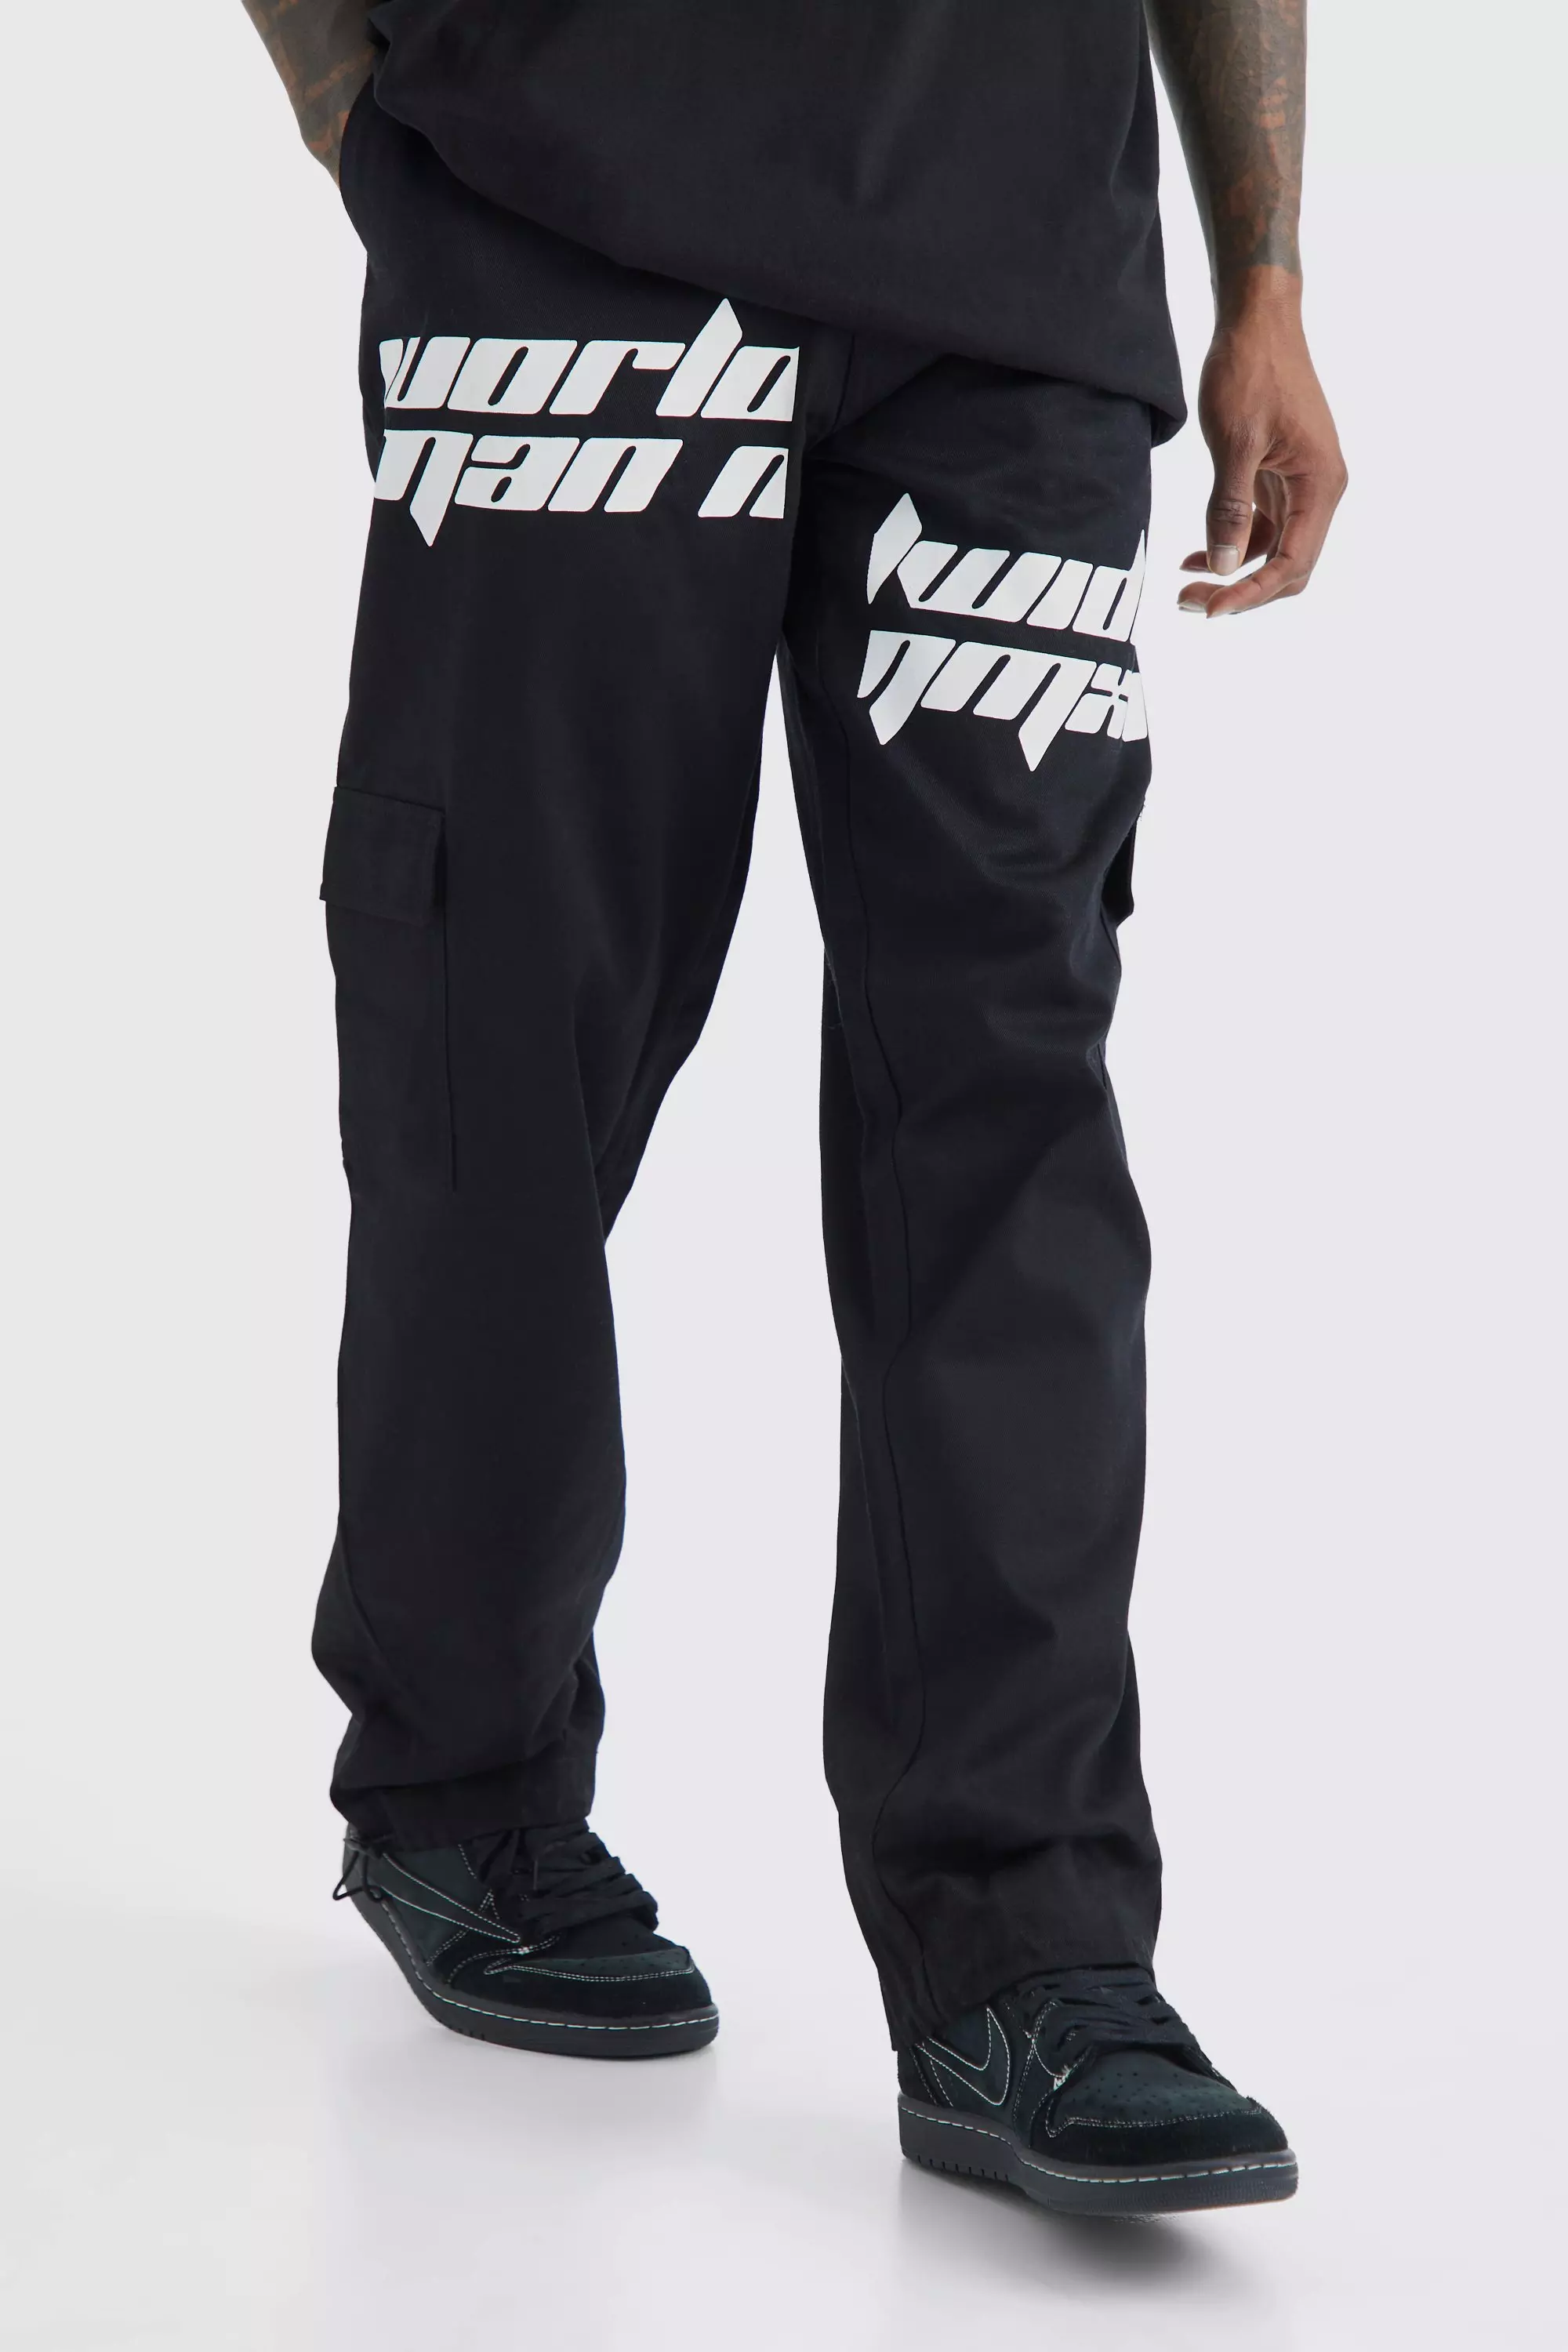 Relaxed Cargo Spliced Text Print Pants Black